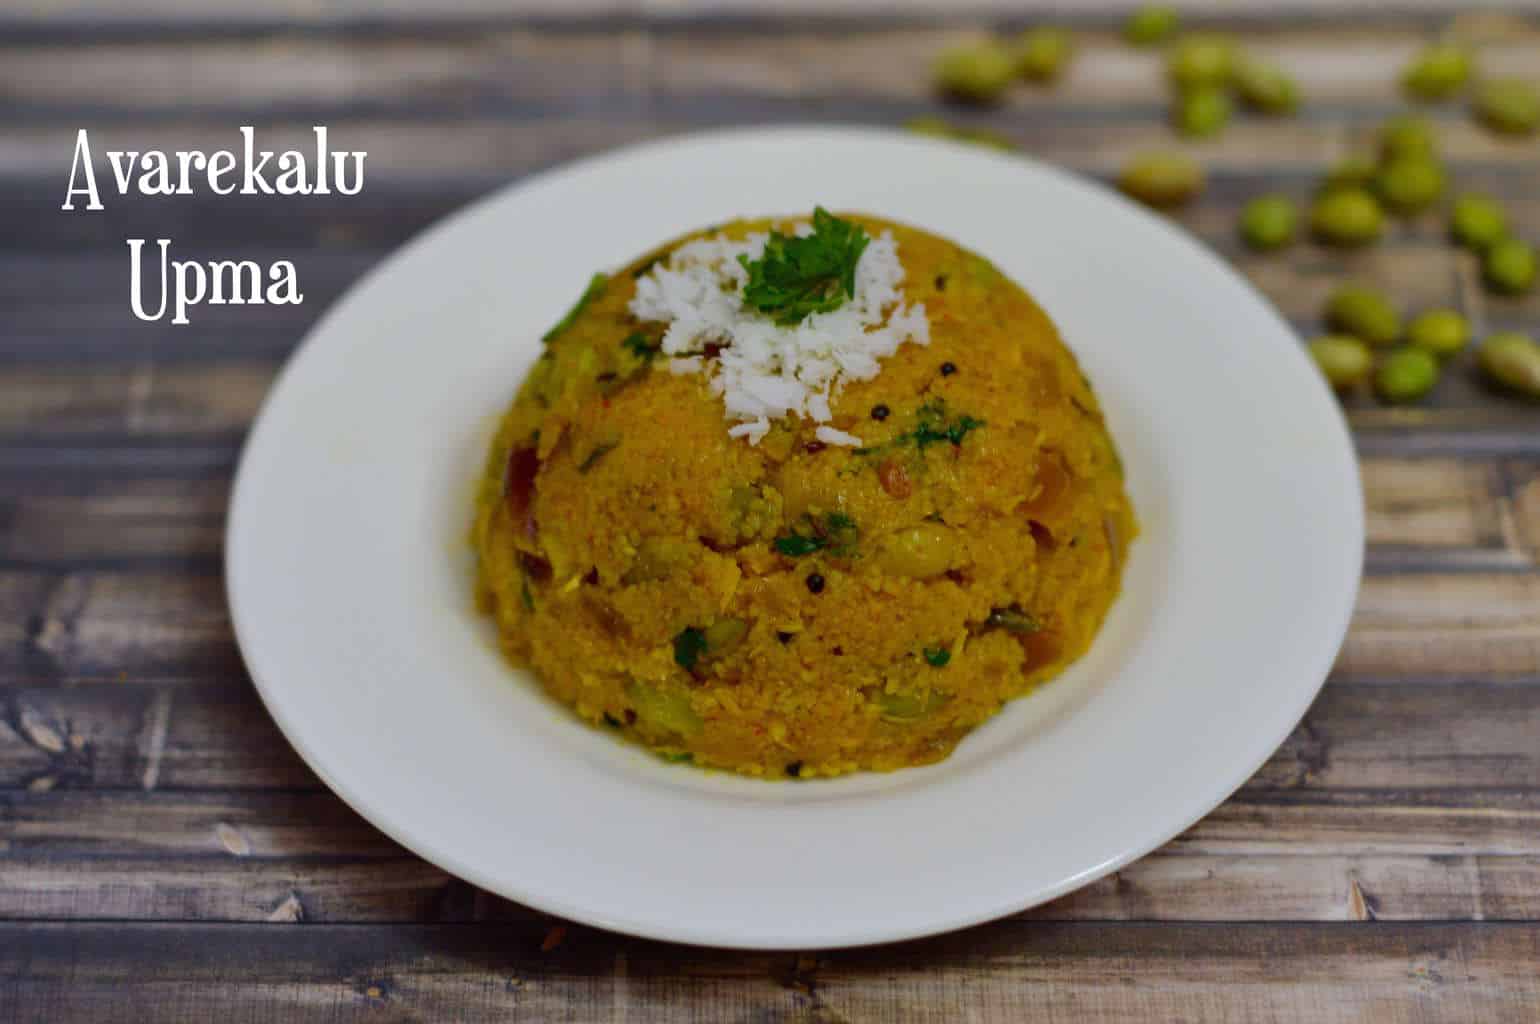 Avarekalu Upma served on a plate topped with fresh coconut and cilantro